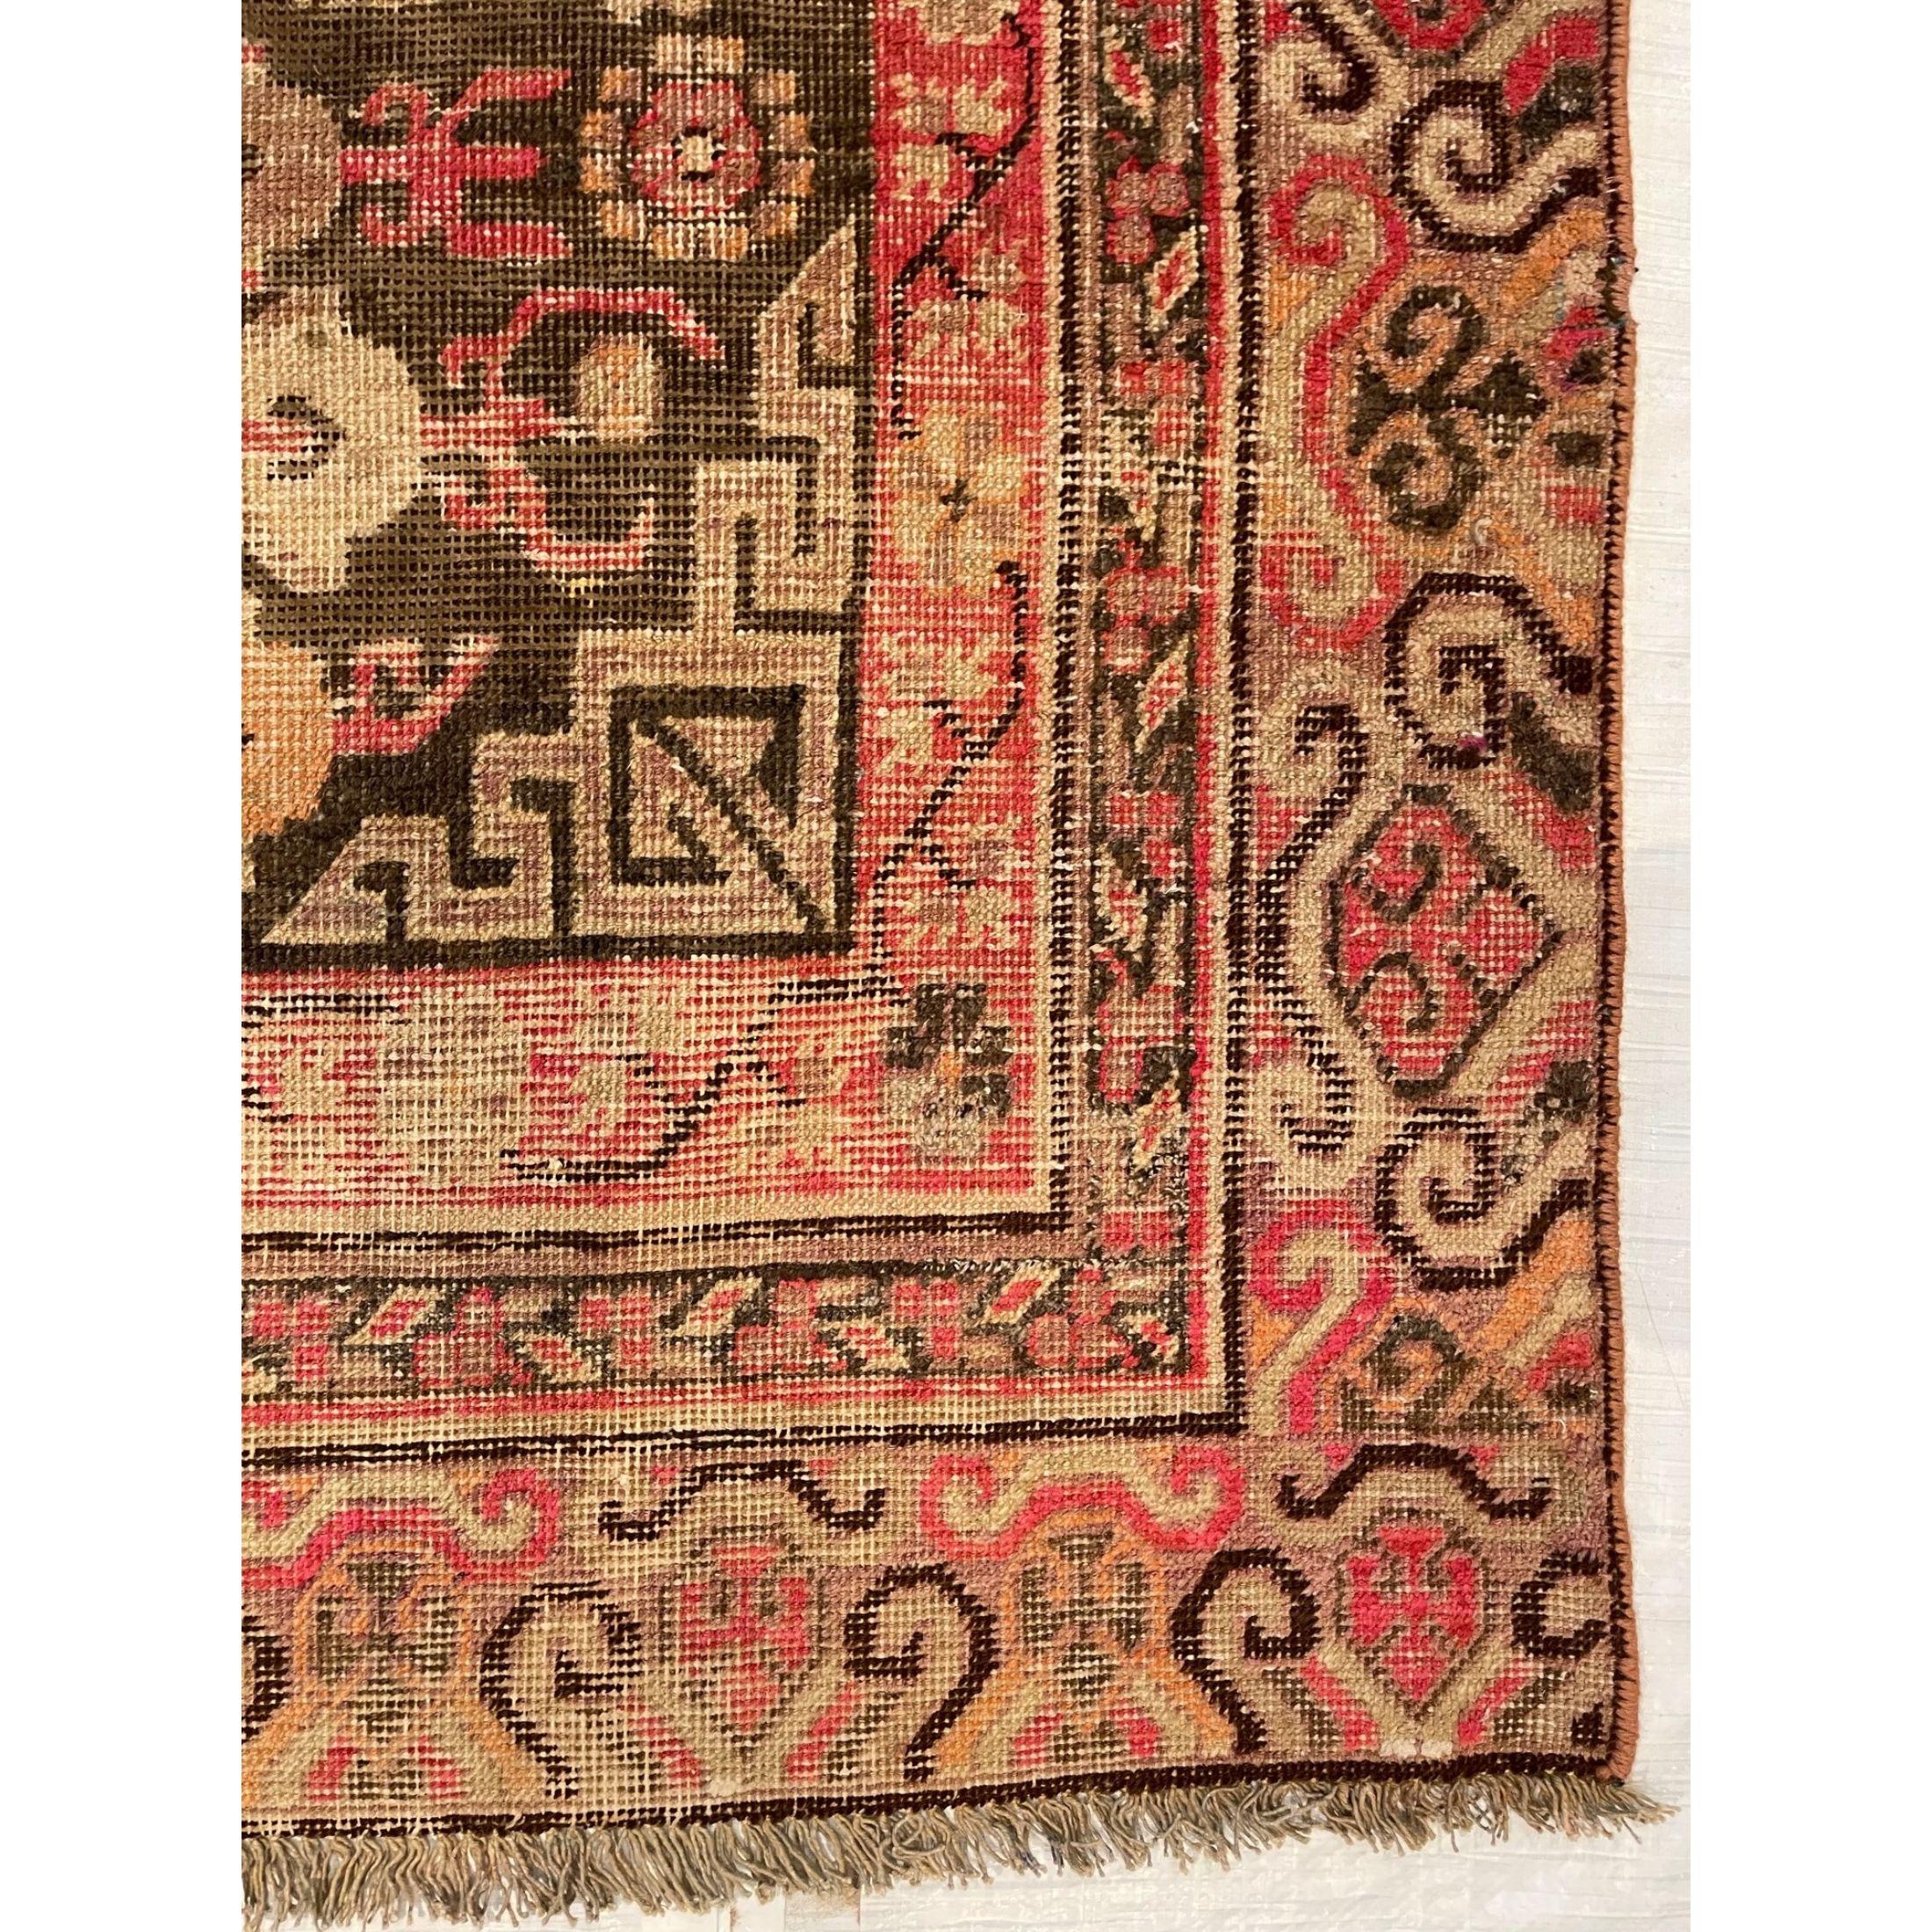 Other Early 20th Century Antique Khotan Samarkand Rug For Sale